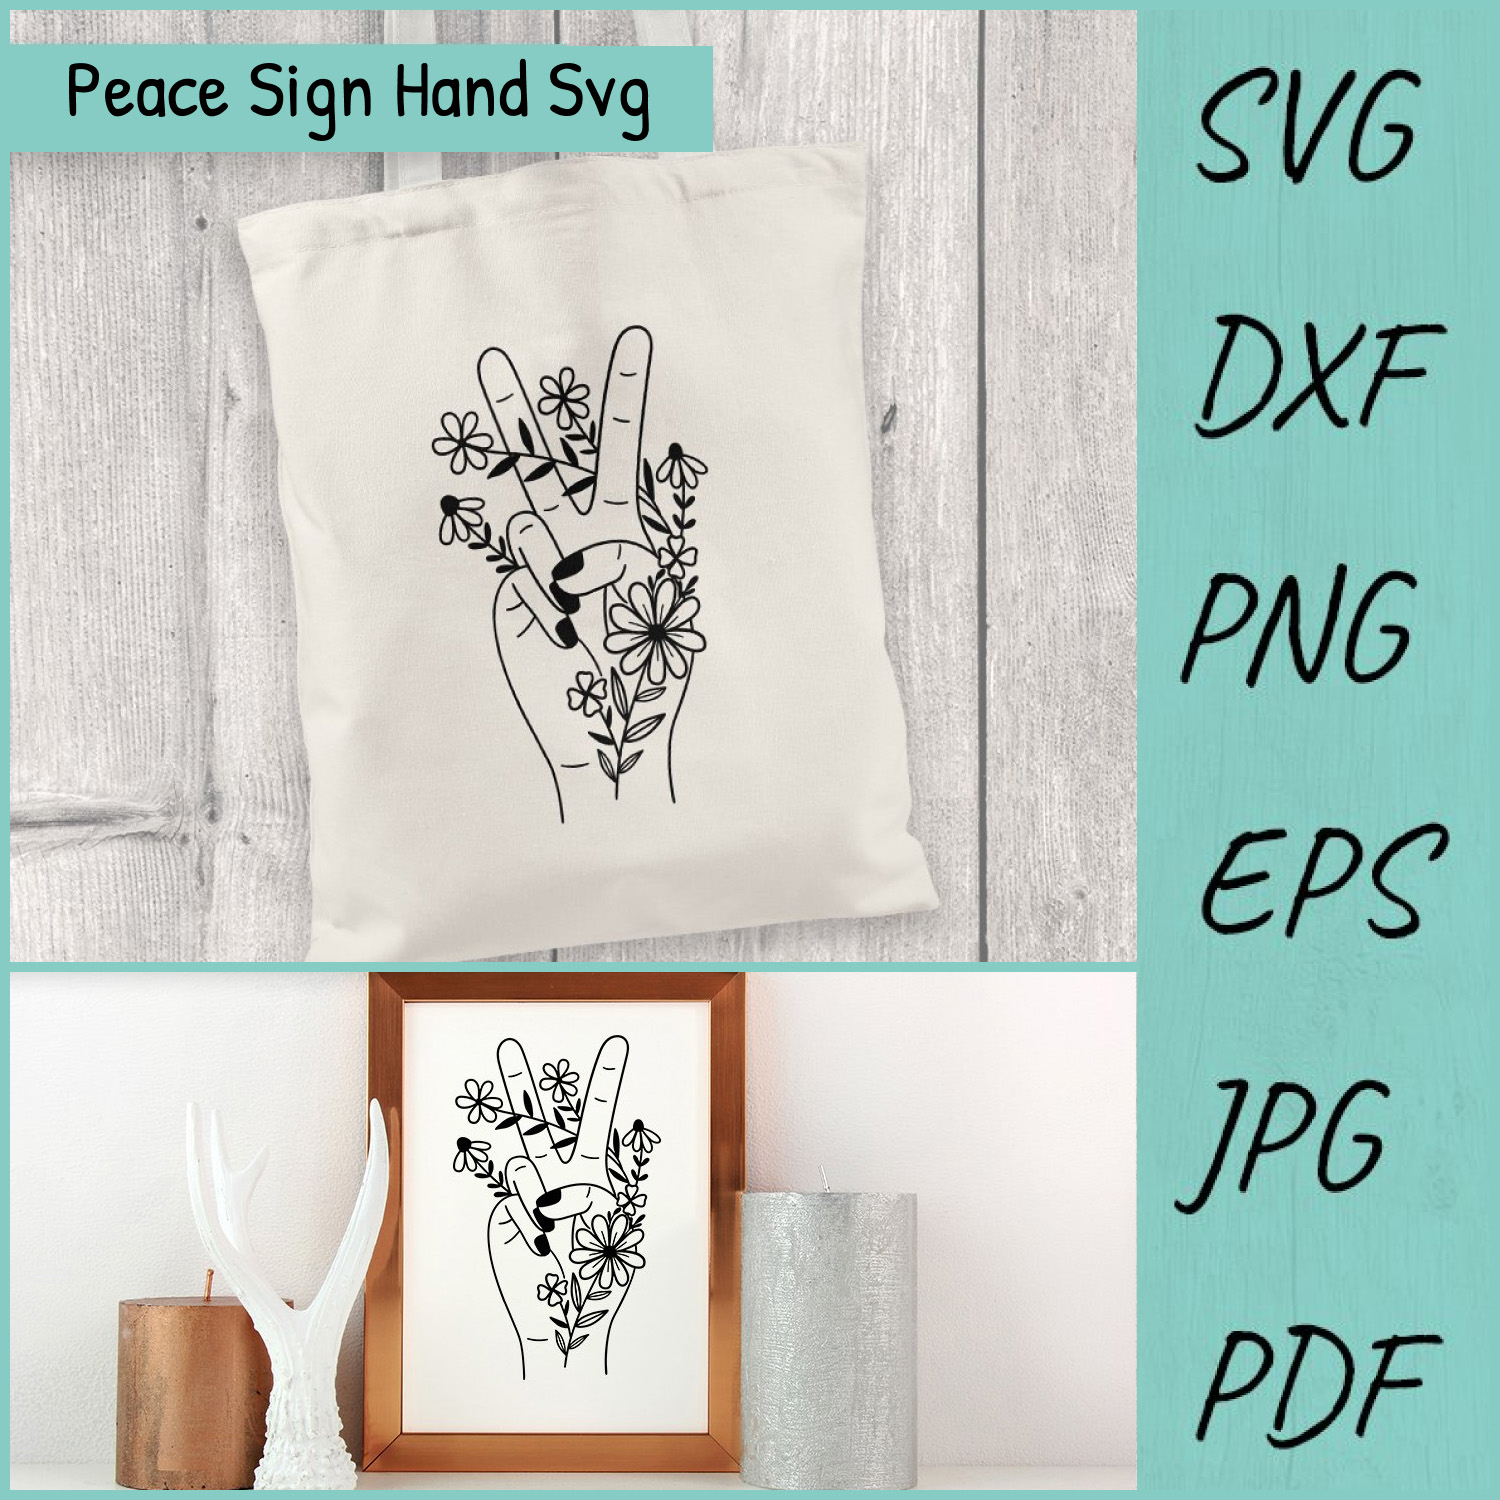 Flower SVG, Peace Sign Hand Svg, Wildflowers Svg, Floral SVG main cover.